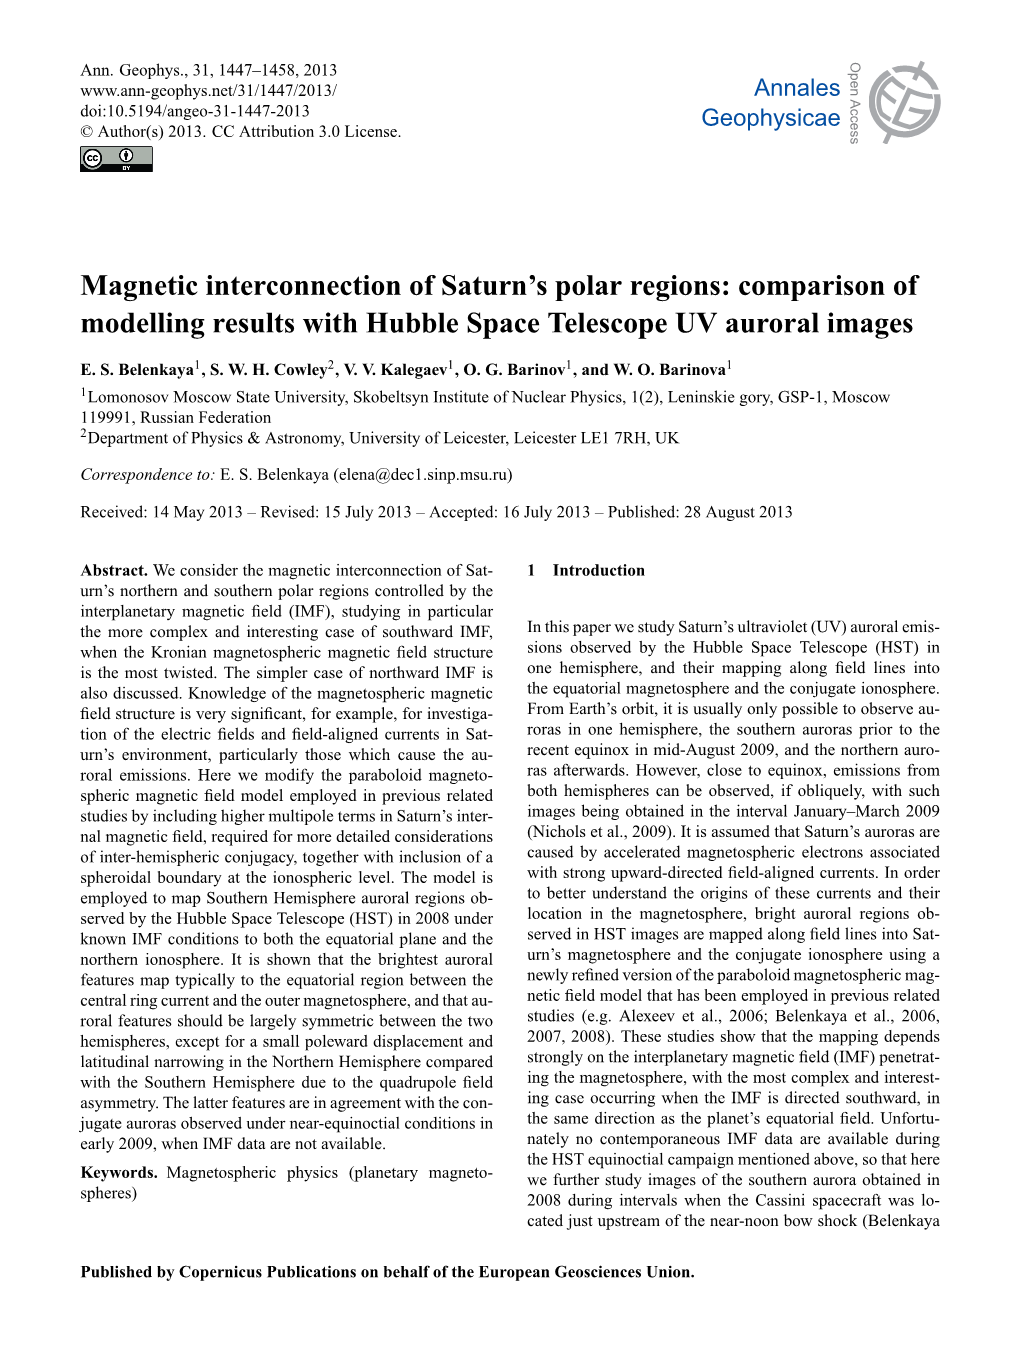 Magnetic Interconnection of Saturn's Polar Regions: Comparison of Modelling Results with Hubble Space Telescope UV Auroral